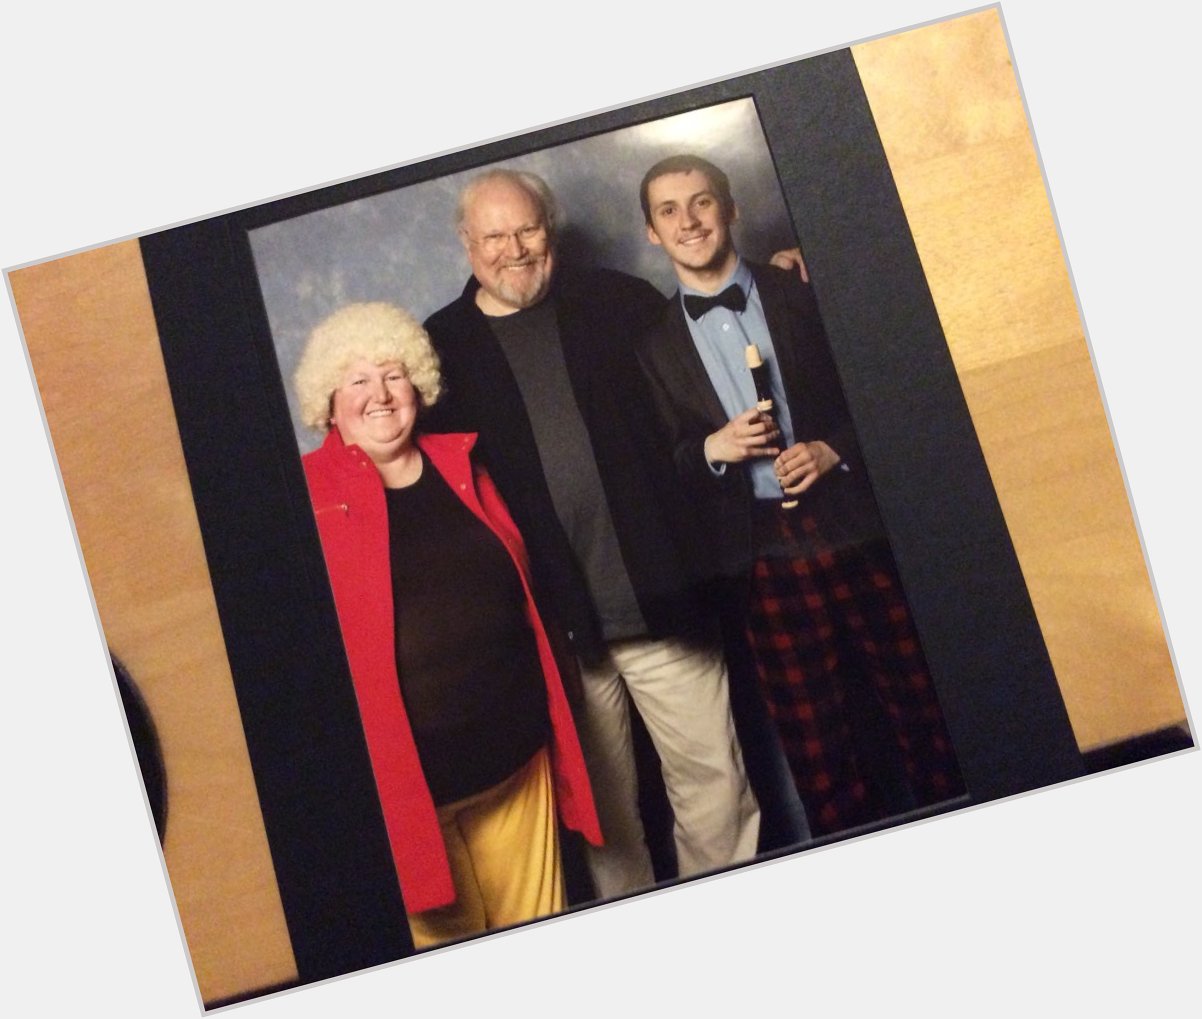  Happy Birthday to the Sixth Doctor Colin Baker! Still chuffed to have met the man at Bath Comic Con. 